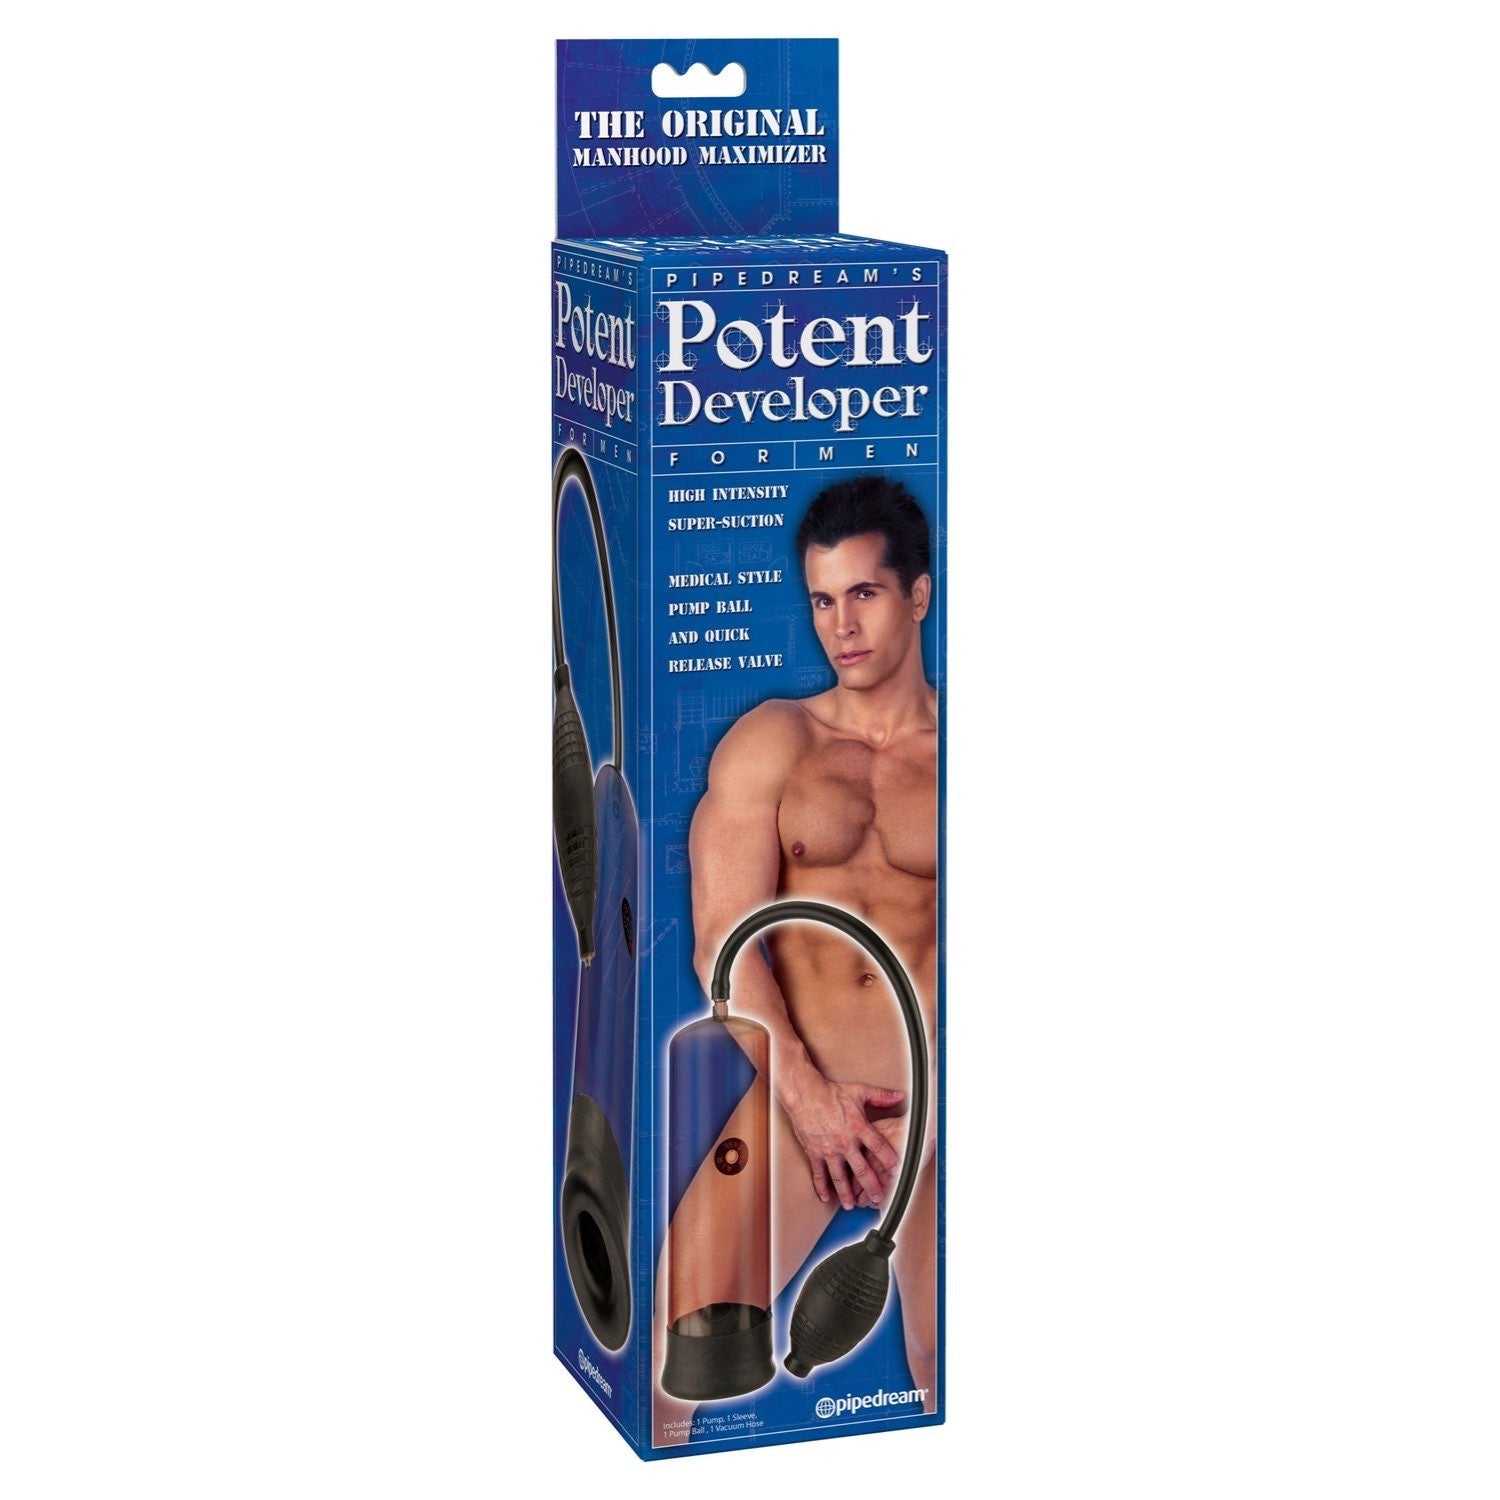  Potent Developer For Men - Smoke Penis Pump by Pipedream